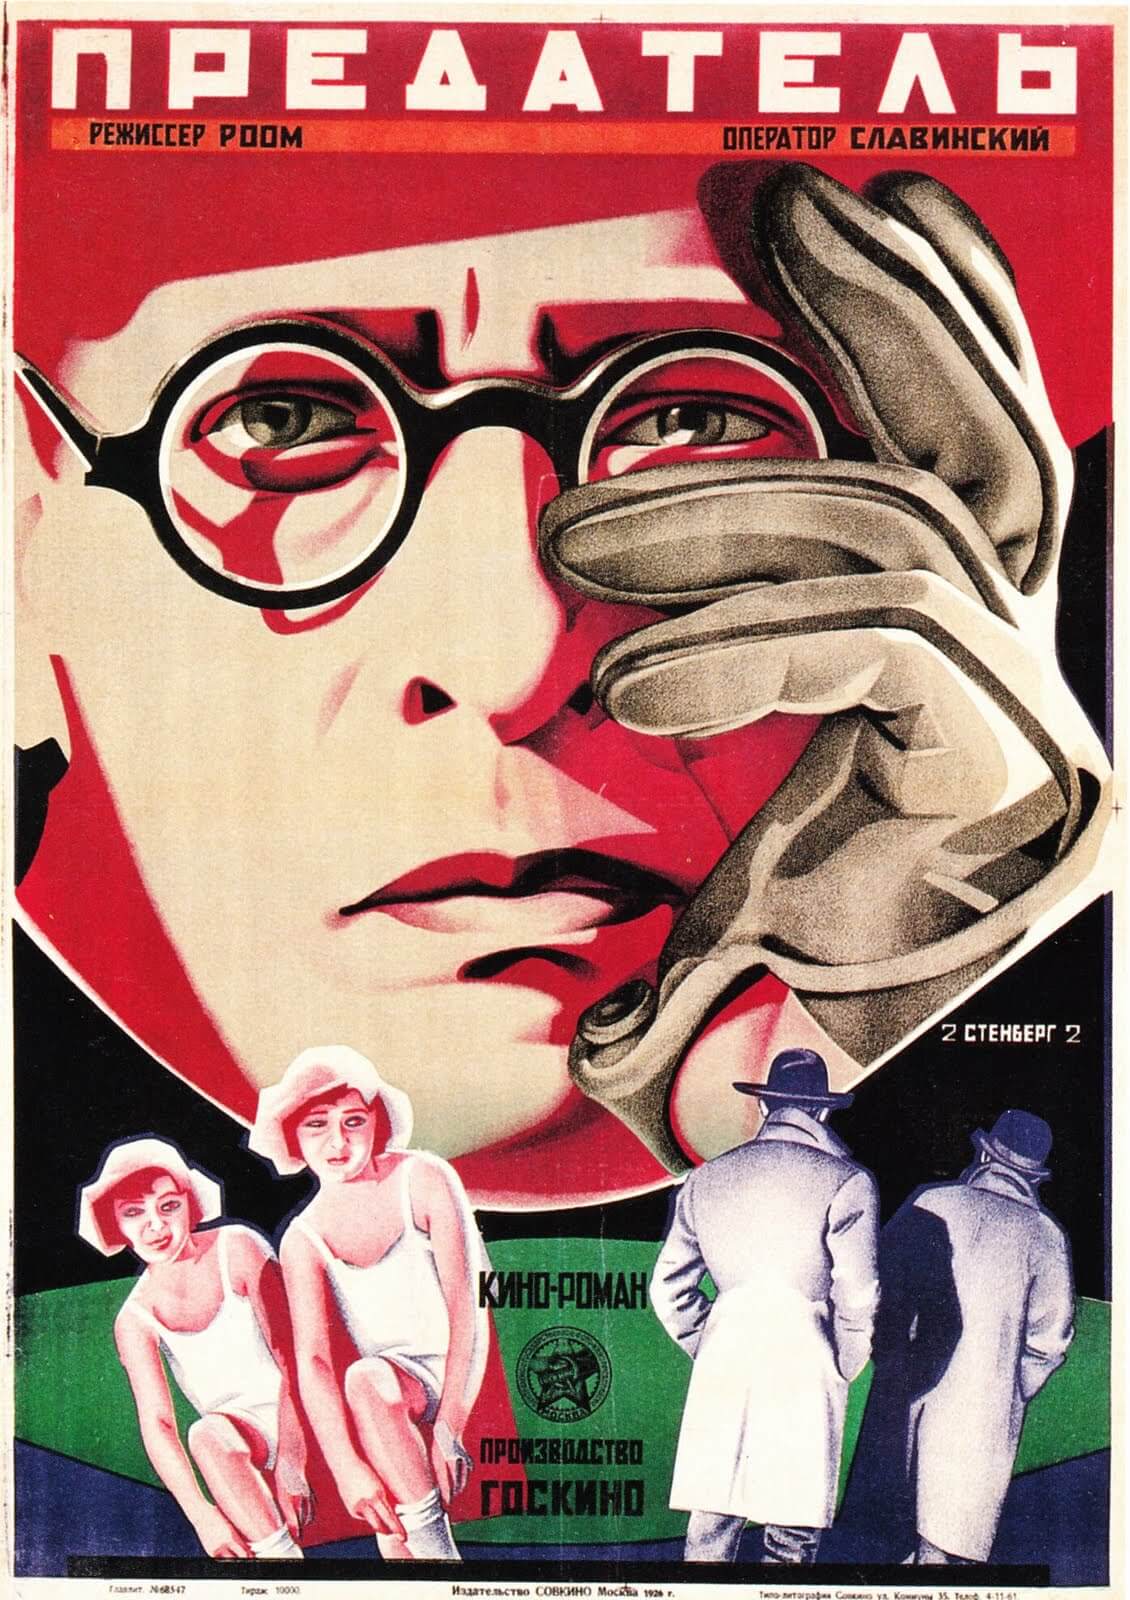 The Traitor, directed by Abram Room, 1926 Poster by the Stenberg brothers